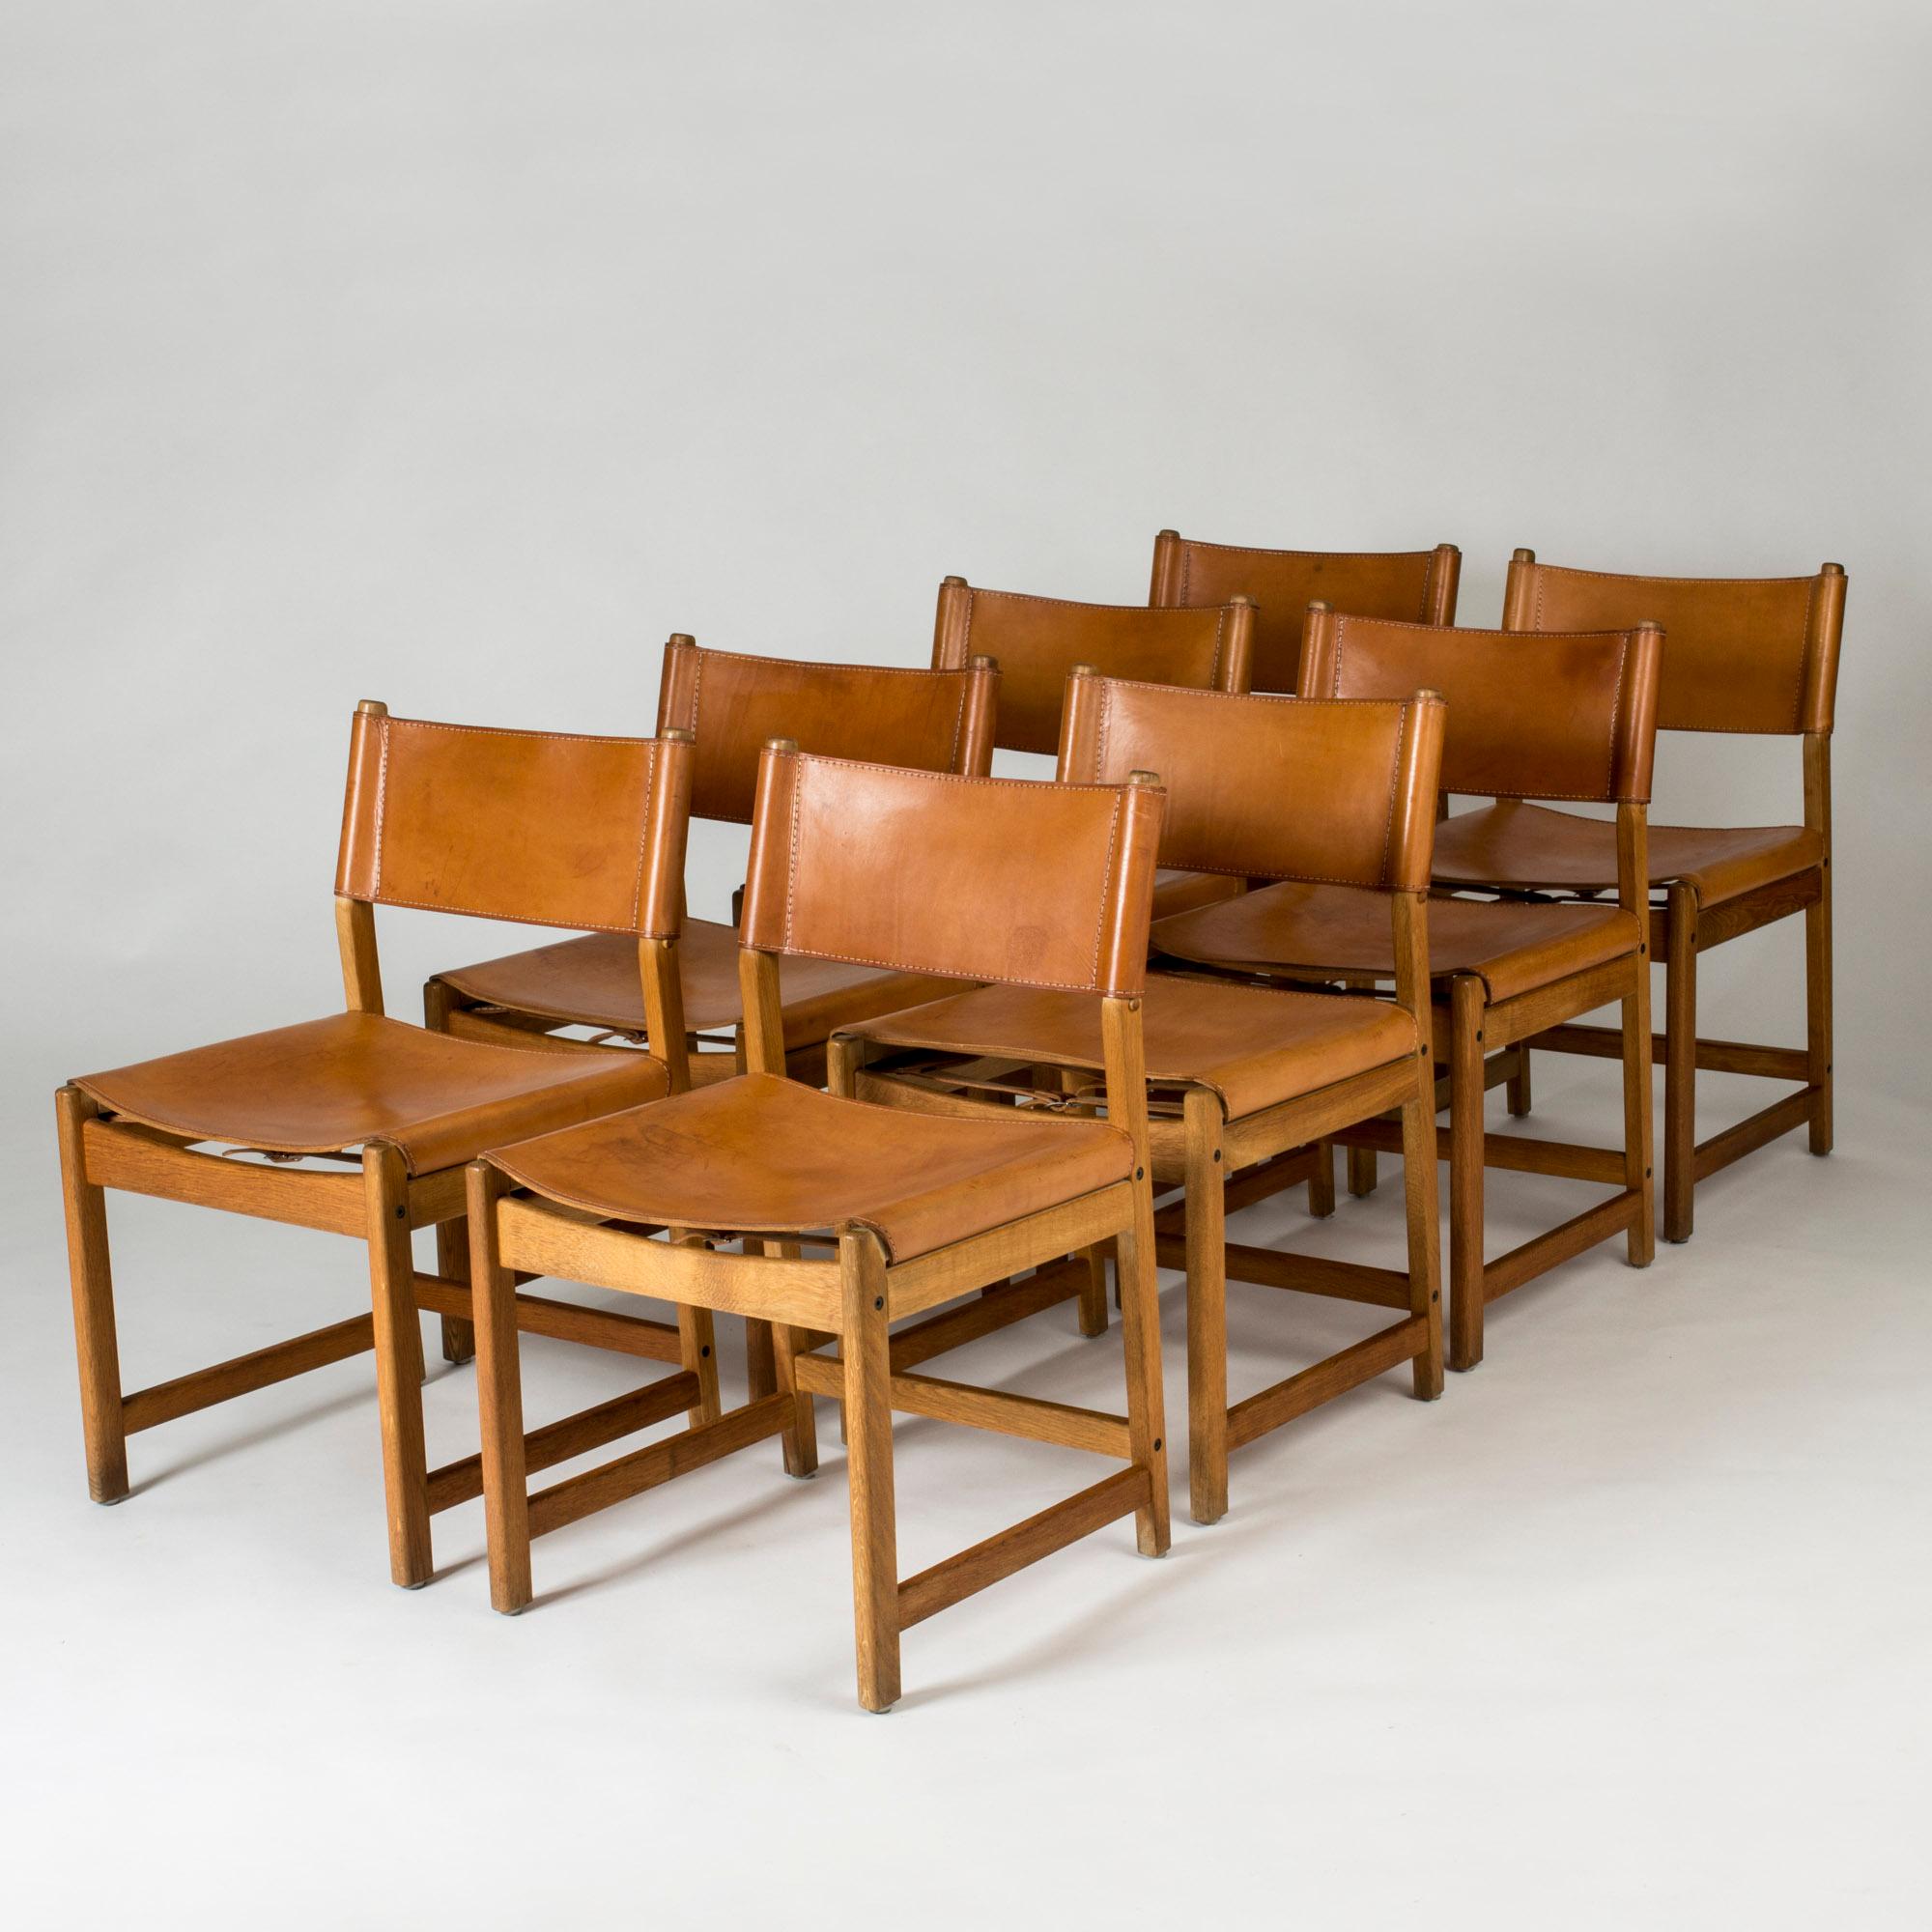 Set of eight amazing dining chairs by Kurt Østervig, with boxy oak silhouettes and leather seats and backs. Details of white seams on the sturdy, nicely patinated leather.
   